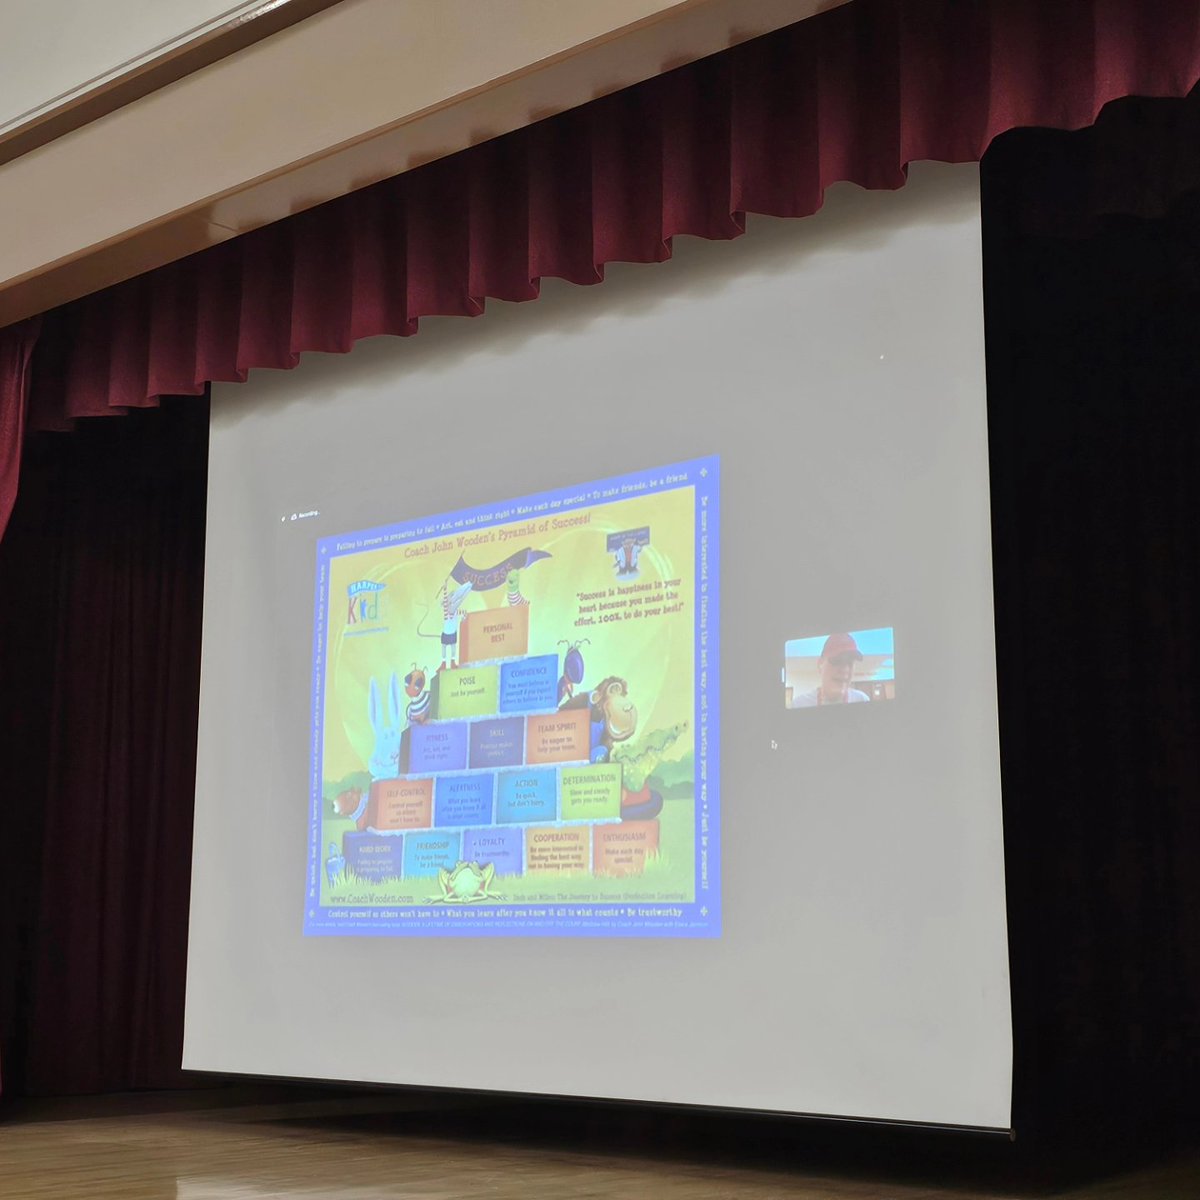 Let's take a look back at last Friday's @HarperforKids Virtual Assembly with @JacobIkaros a Technical & Horticultural Specialist at NASA's Kennedy Space Center-- part of the NASA team to grow a New Mexico chile in space. Thank you for a wonderful assembly!